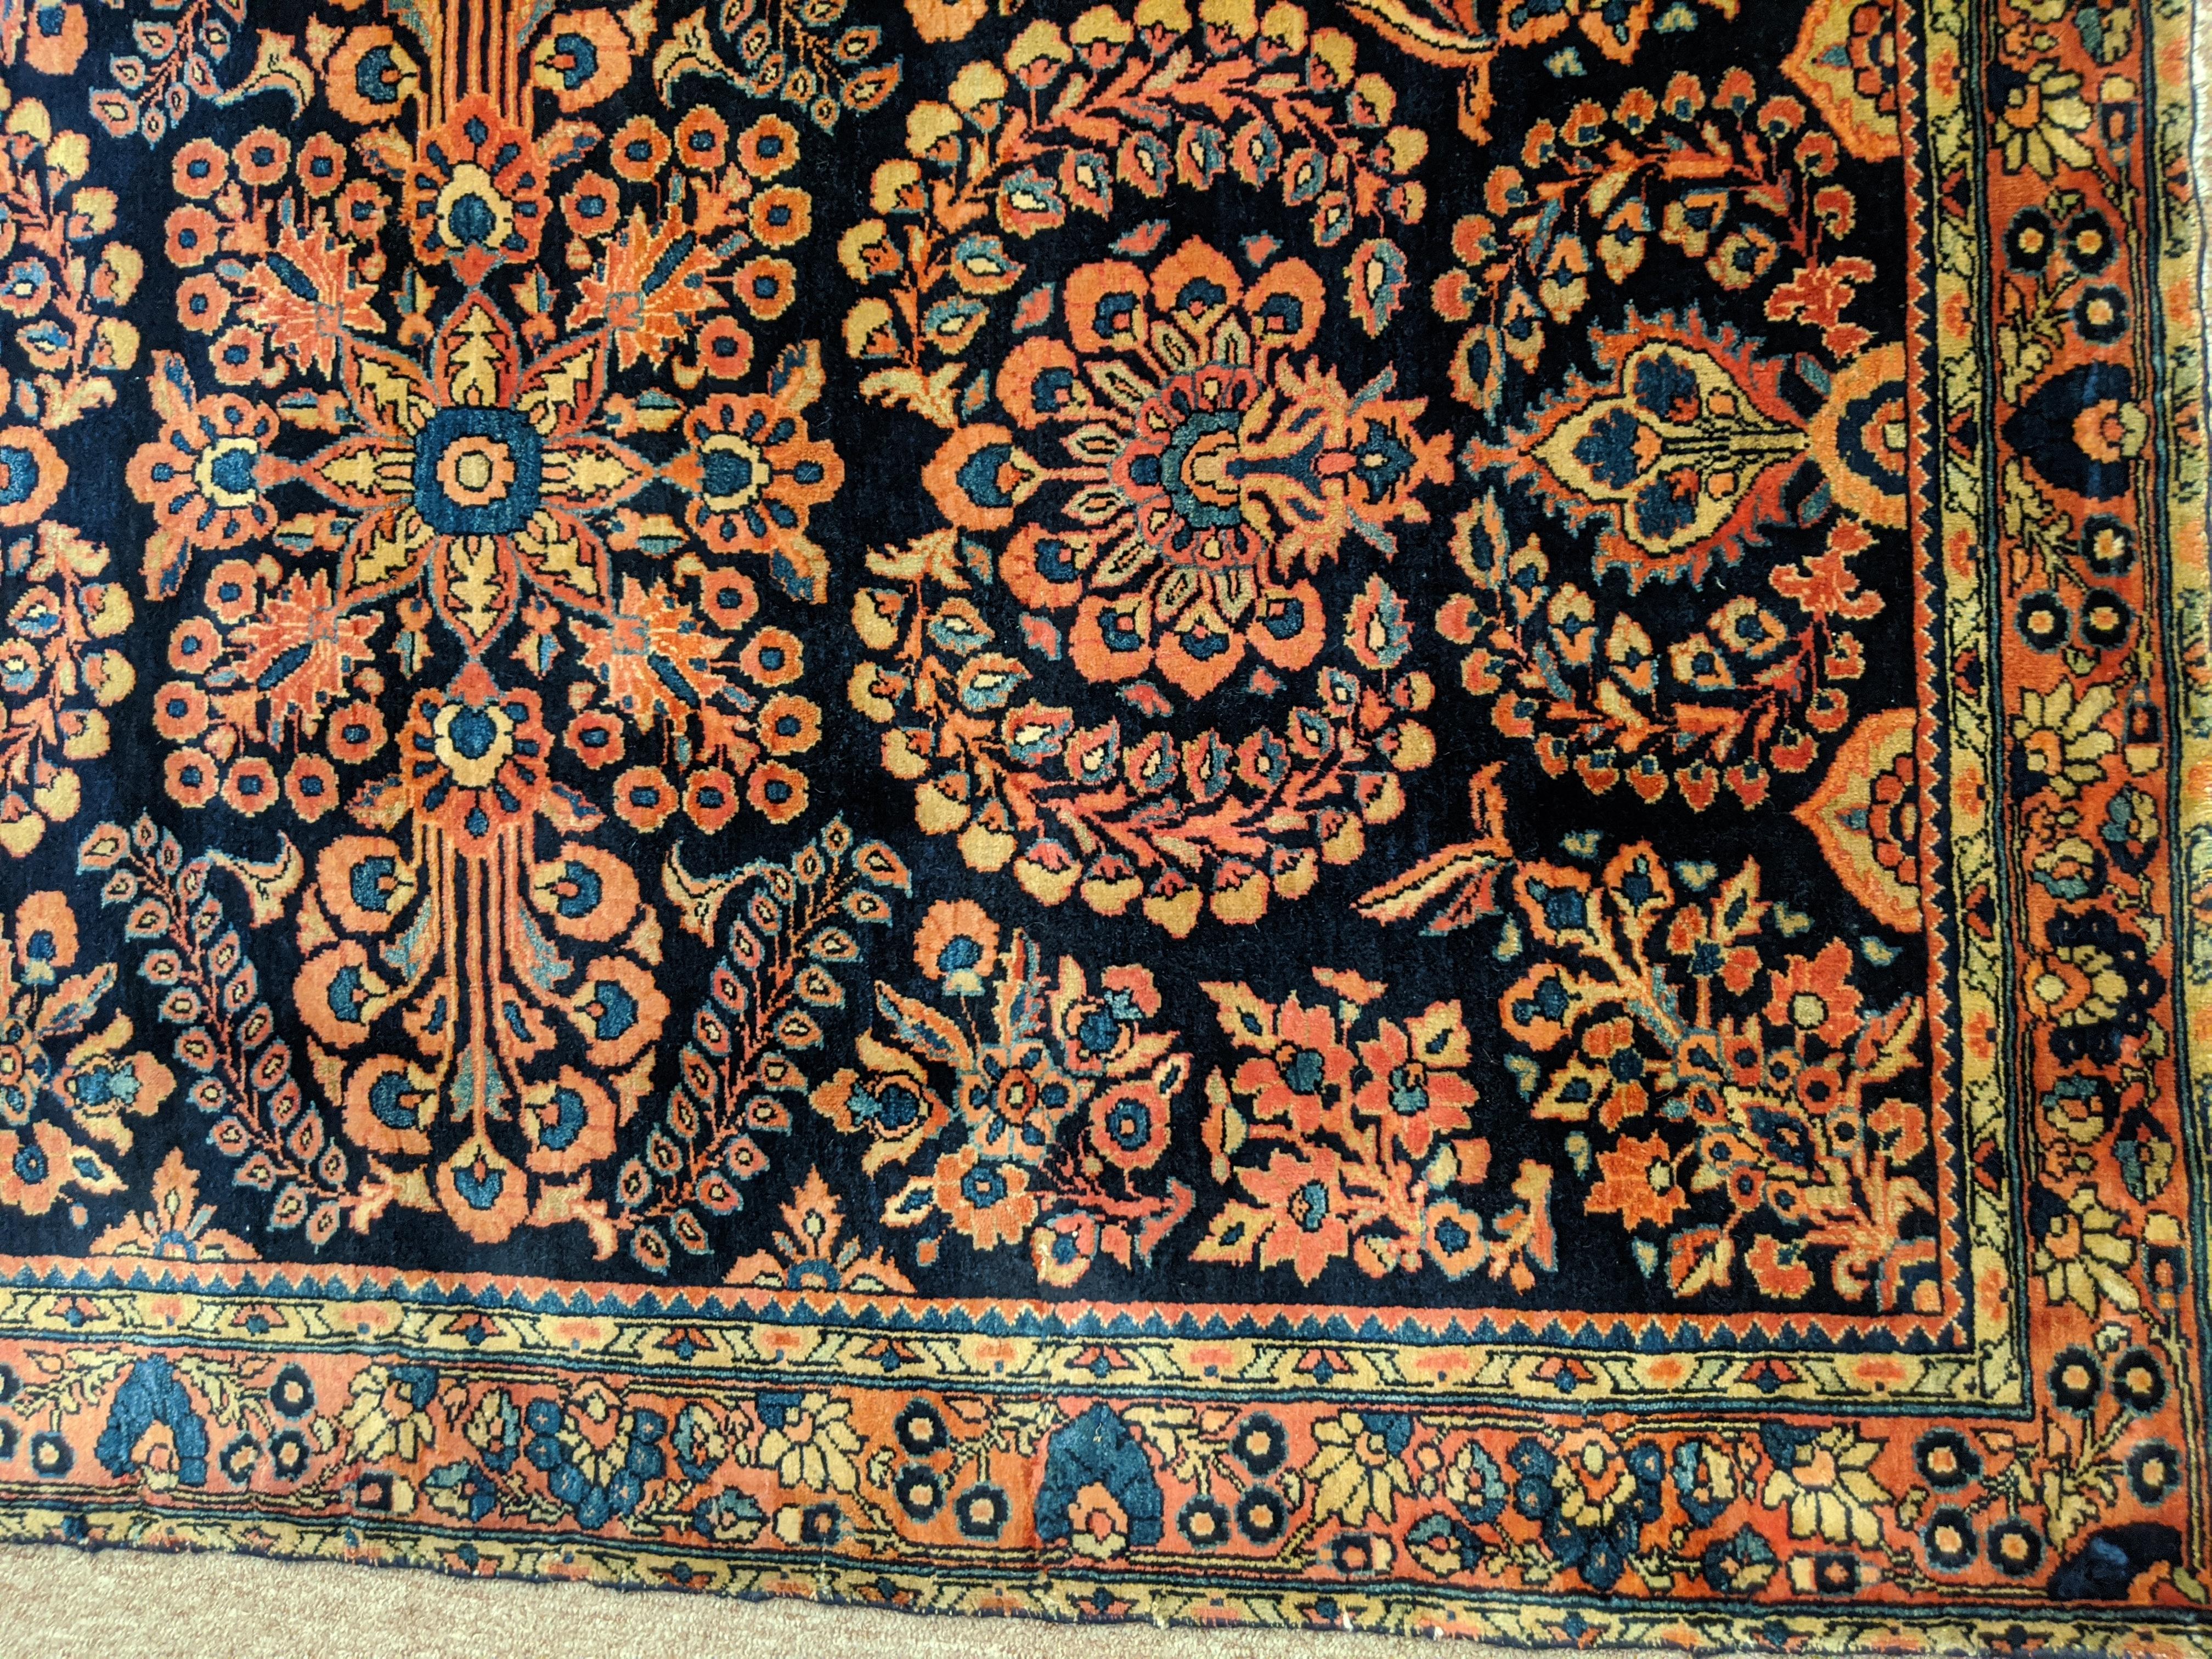 Persian Sarouk with an all-over field design with a navy background and a coral border. The field is decorated with vines, tendrils and flowers in light blue, gold and teal. The wool is so soft that it feels like silk, circa 1920. It is 3-3 x 4-10.